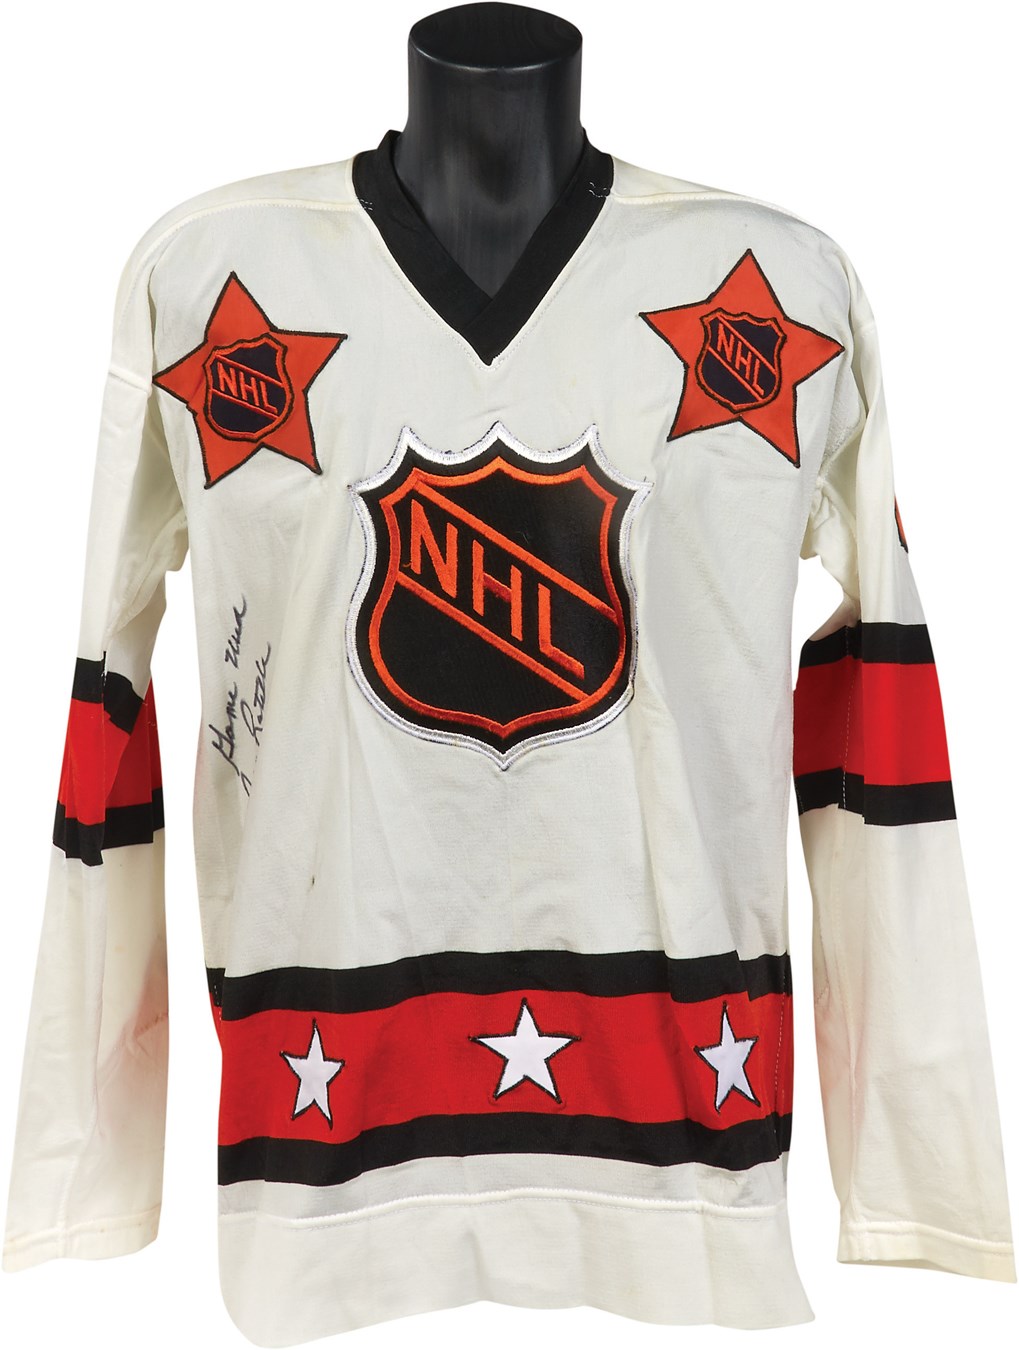 - 1973 Jean Ratelle NHL All-Star Game Worn Jersey (Photomatched)